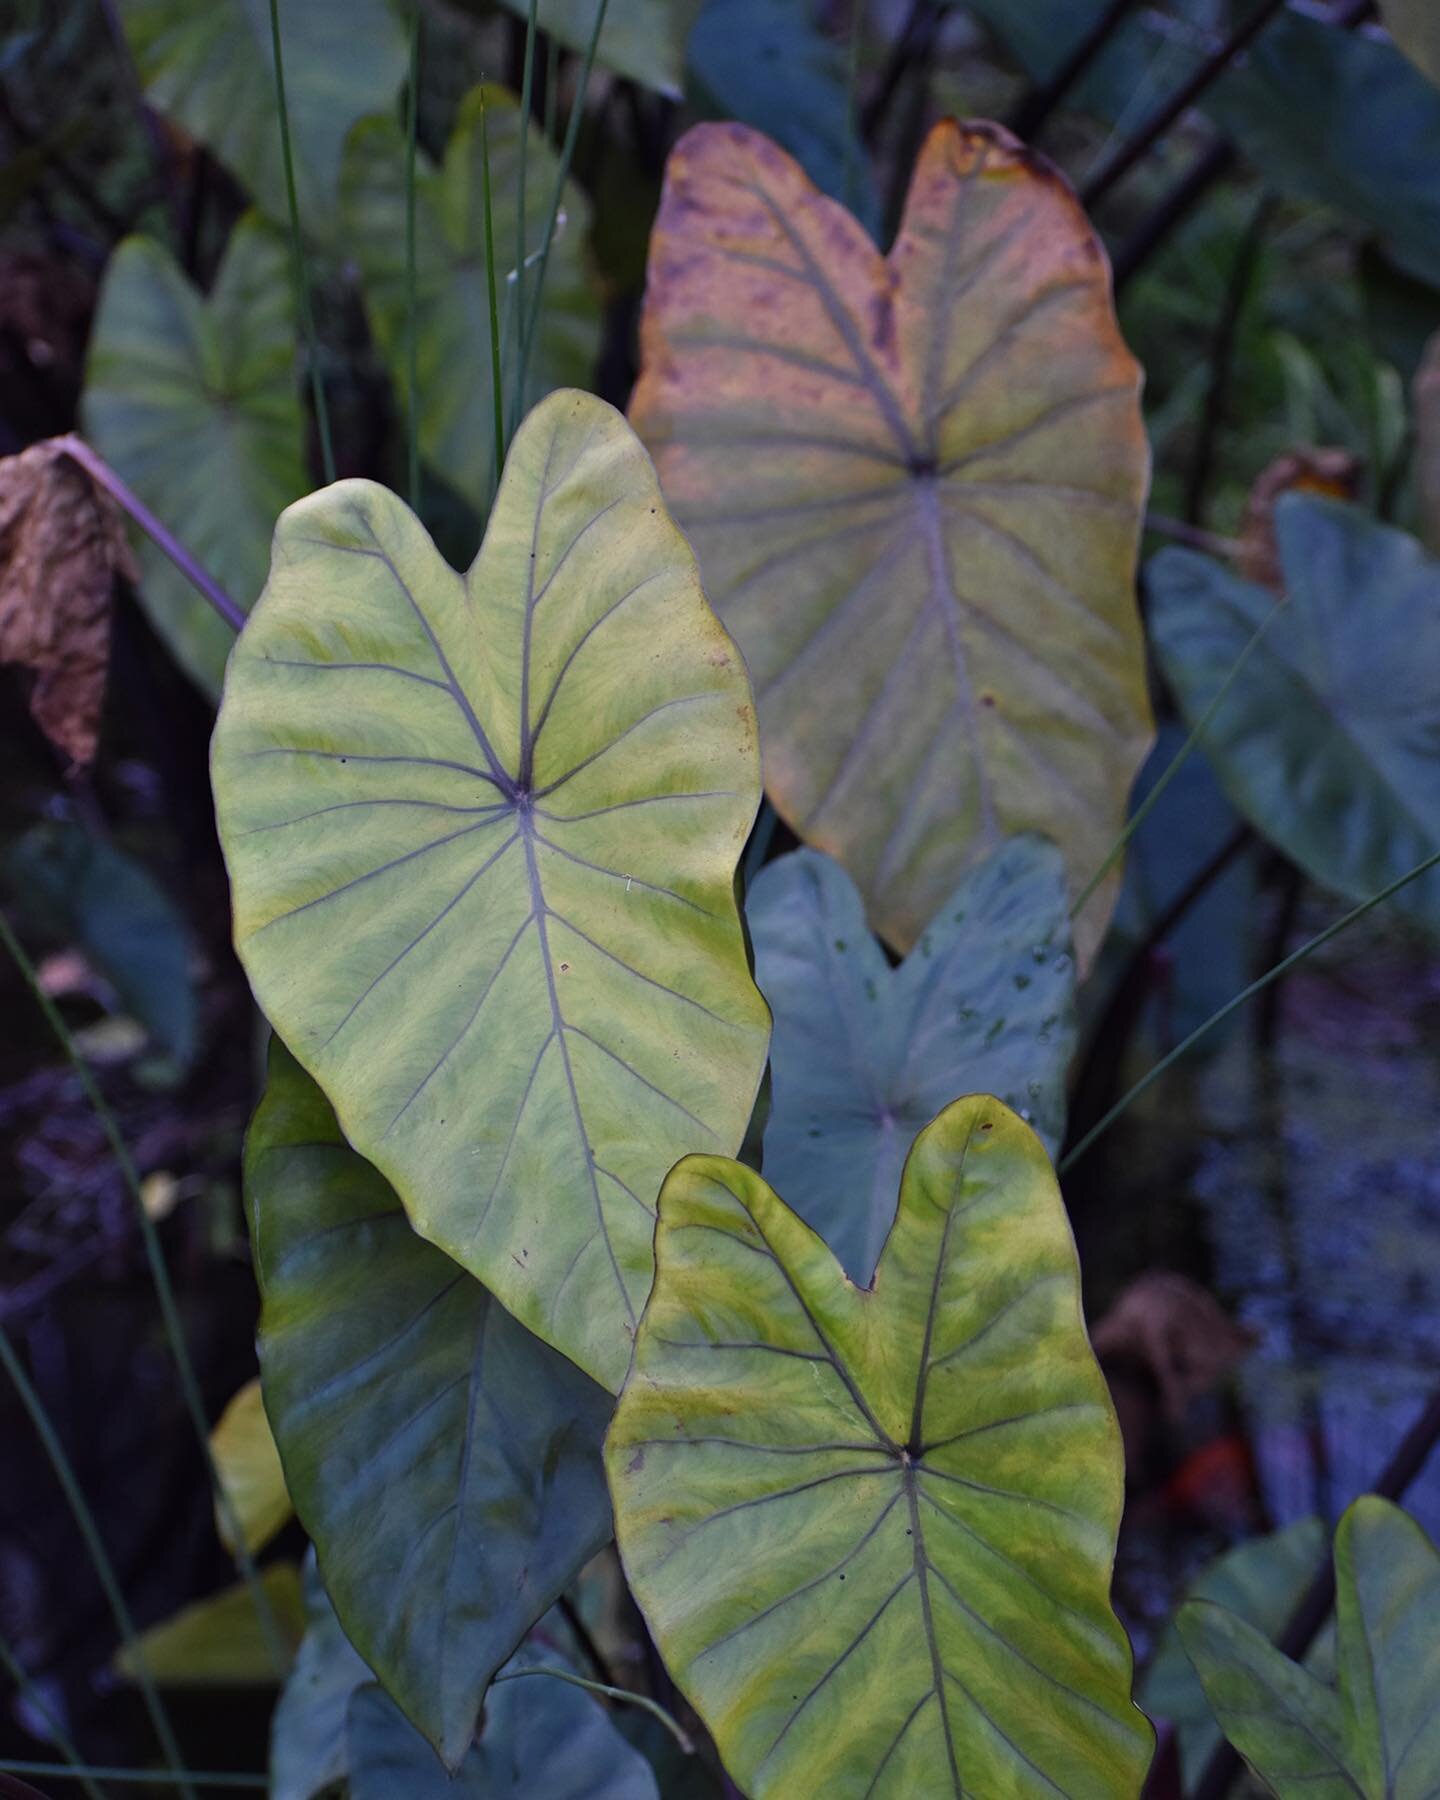 This stunning photo was taken by Lisa during a recent individual lesson at @ceresbrunswick. The repetition of the leaves work beautifully with the subtle variation in colour.

Photo &copy; Lisa dOliveyra

Image: A close up photo of the leaves of a wa